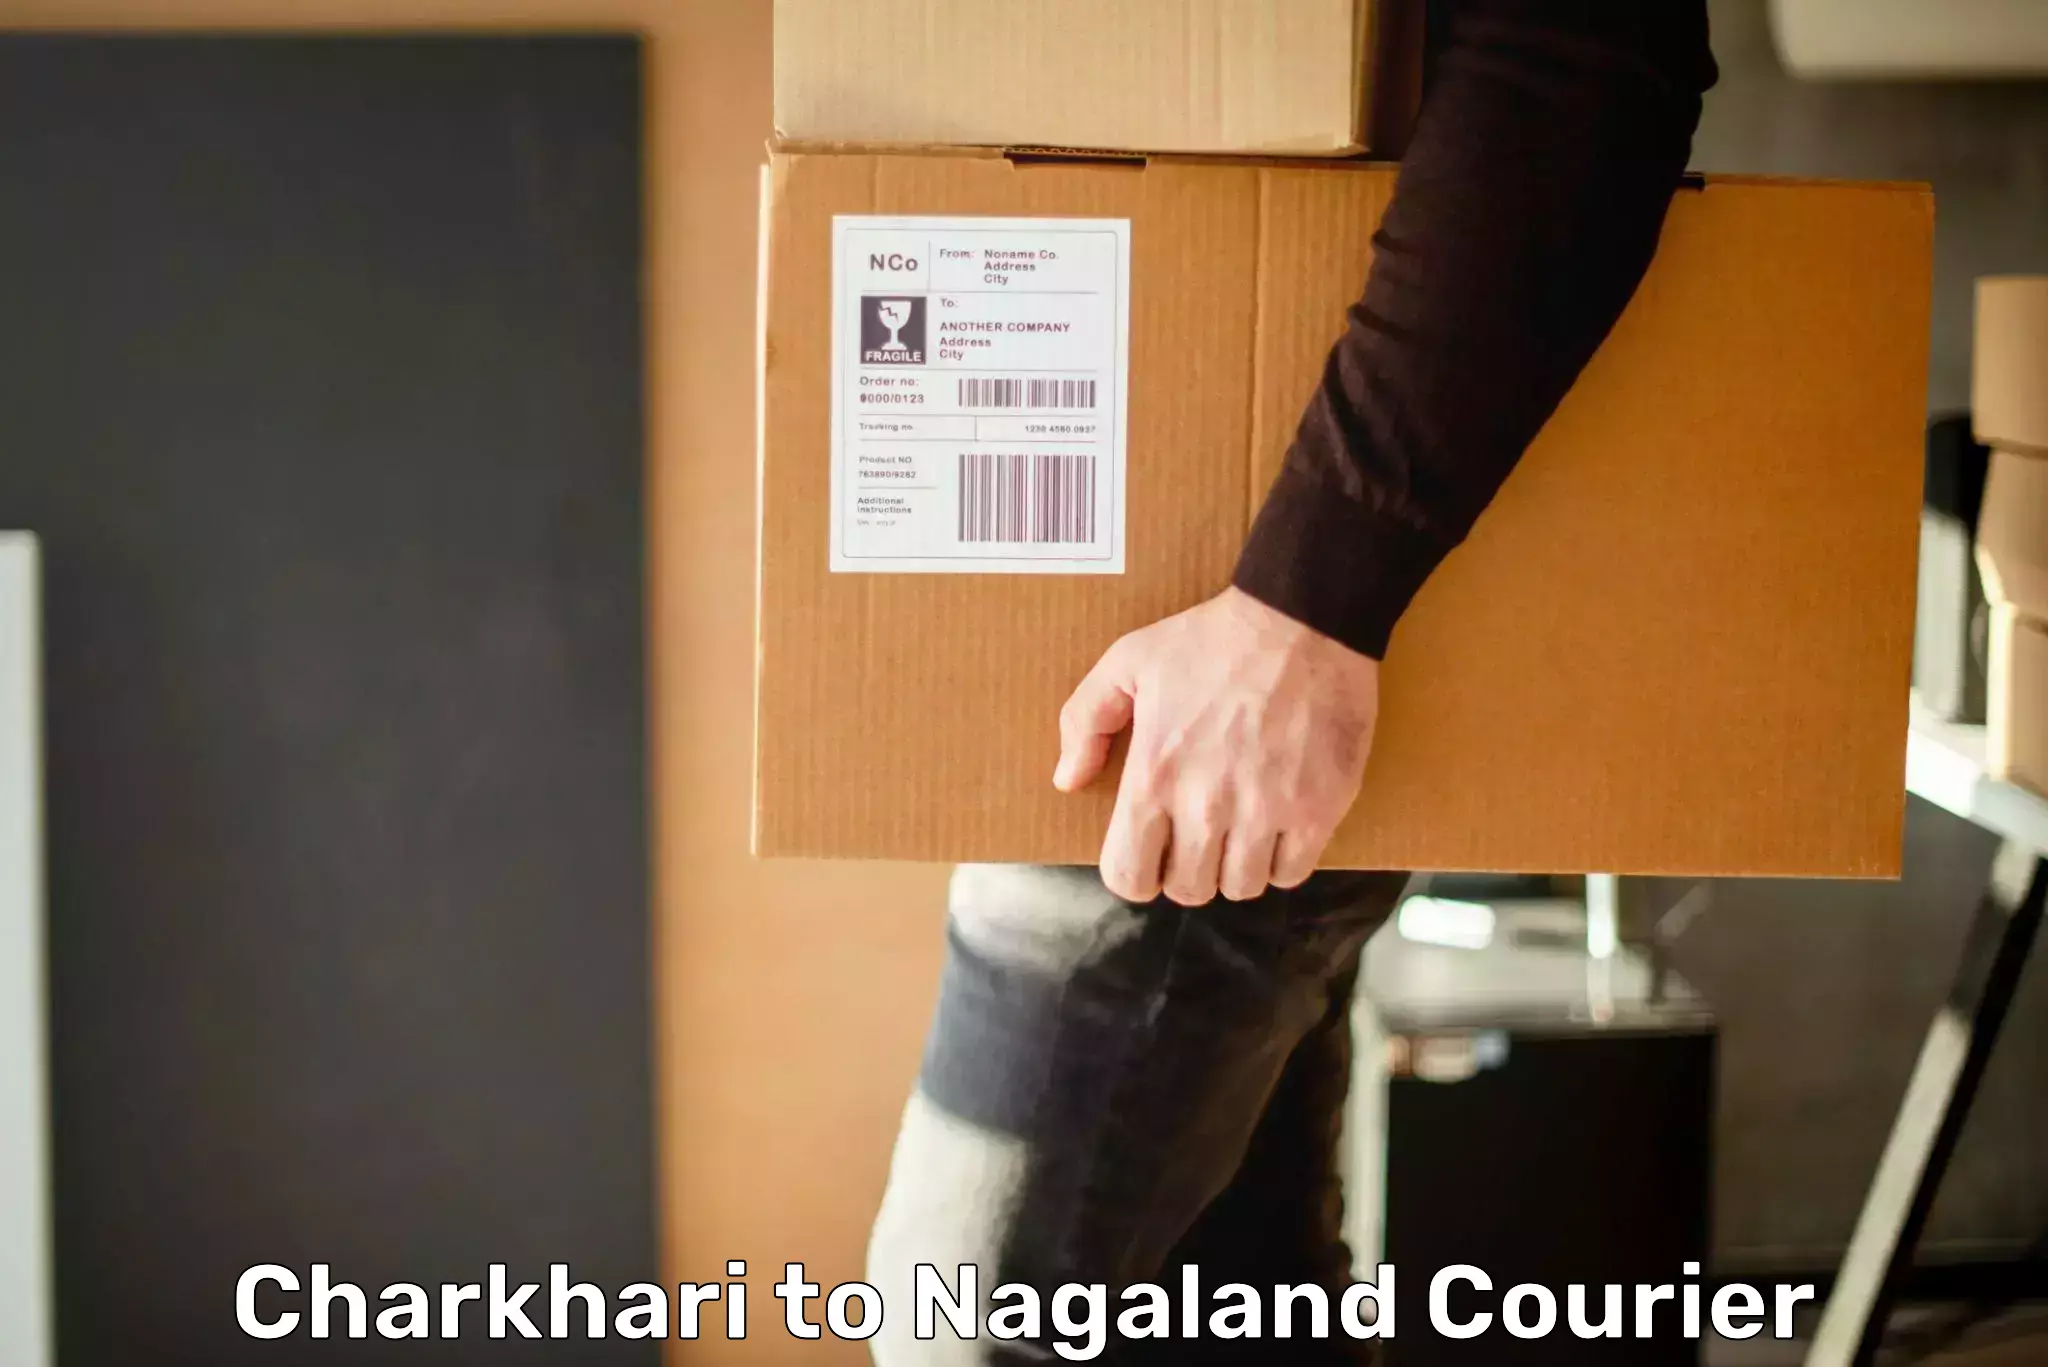 User-friendly delivery service Charkhari to Nagaland